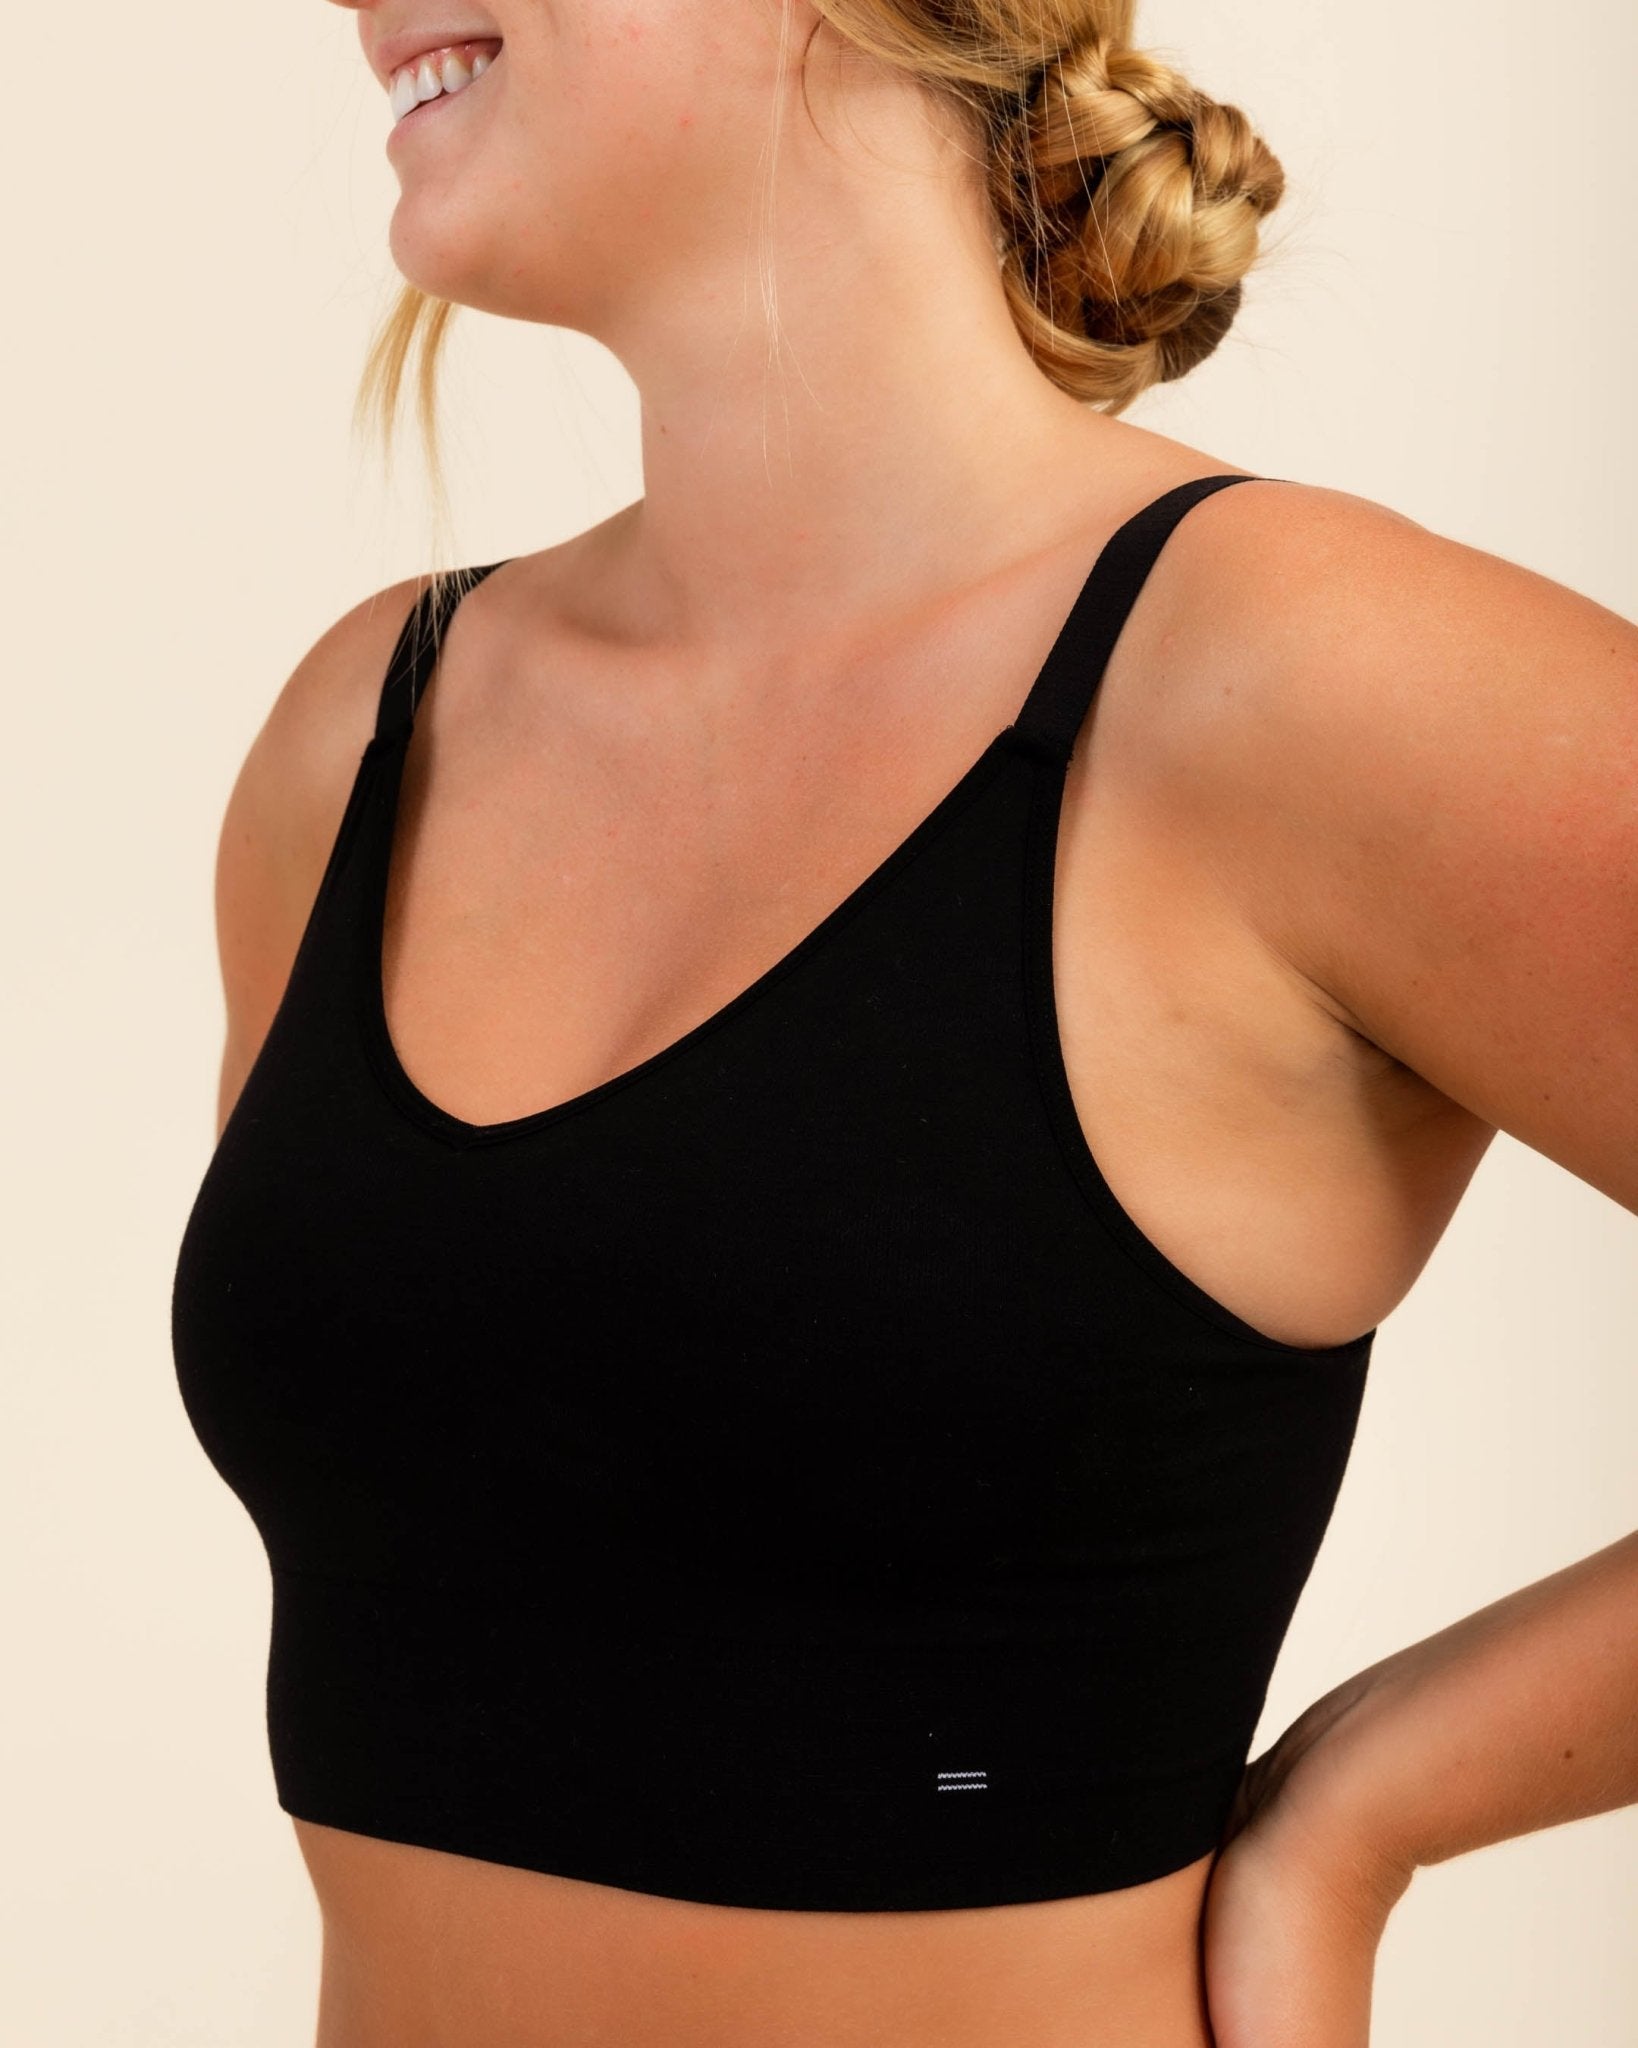 Organic Cotton Yoga Bras - Toxin Free - Best For Your Breasts